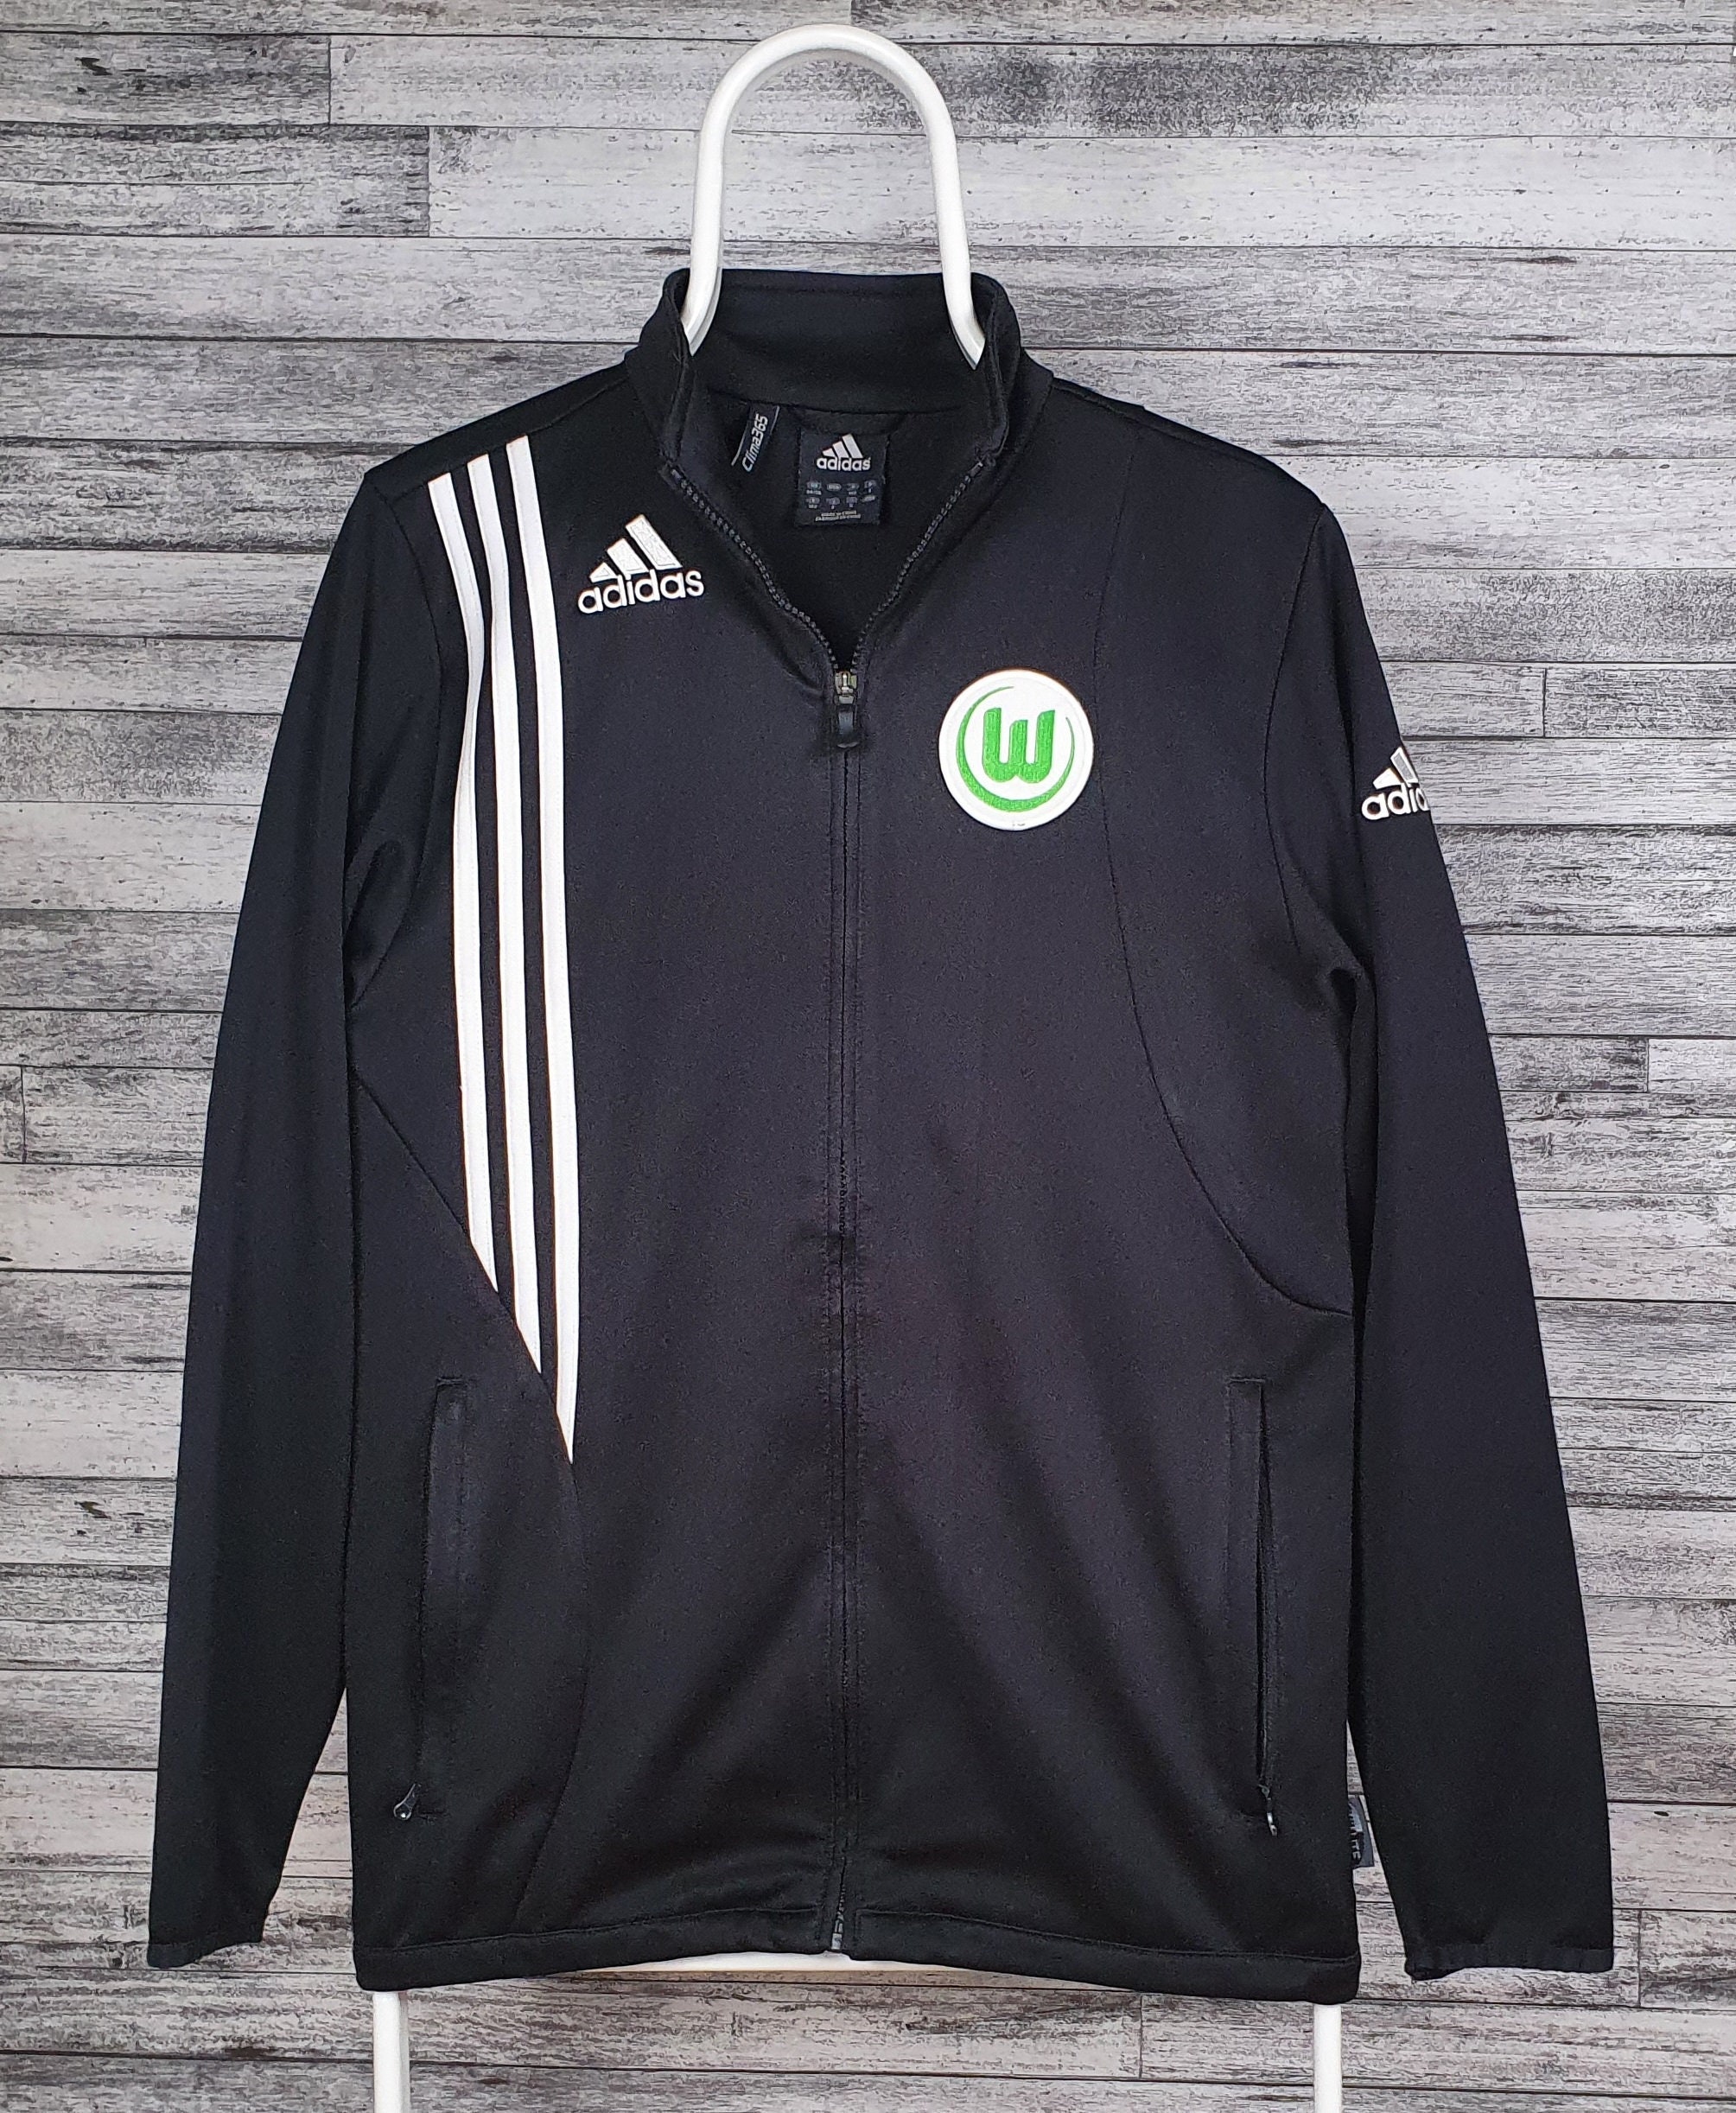 MENS ADIDAS FC REAL BETIS 2016/2017 JACKET TRAINING SOCCER FOOTBALL WHITE  SIZE L